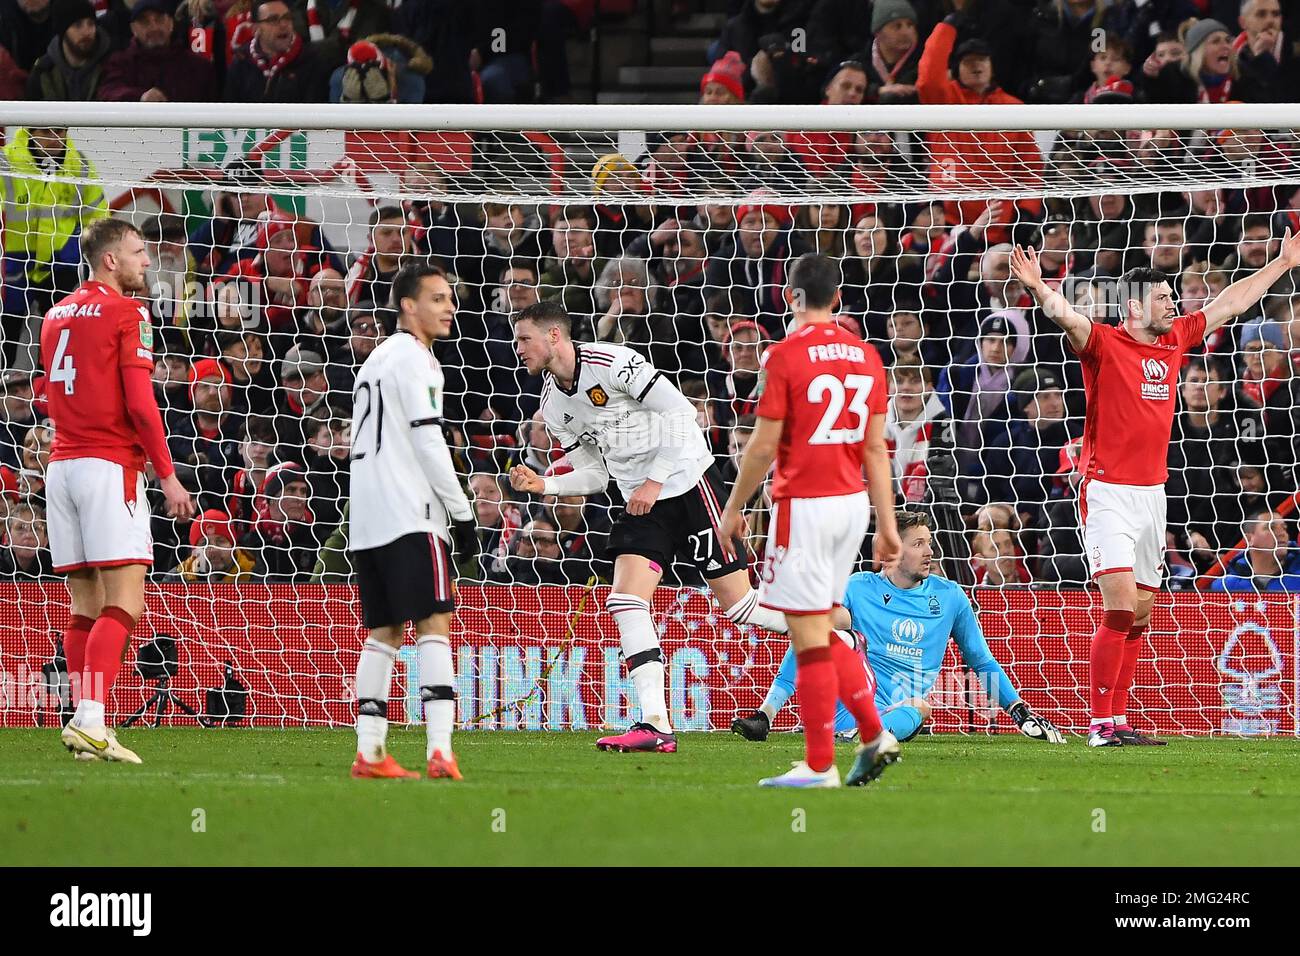 Nottingham, UK. 25th January 2023Wout Weghorst of Manchester United celebrates after scoring a goal to make it 2-0 during the Carabao Cup match between Nottingham Forest and Manchester United at the City Ground, Nottingham on Wednesday 25th January 2023. (Credit: Jon Hobley | MI News) Credit: MI News & Sport /Alamy Live News Stock Photo